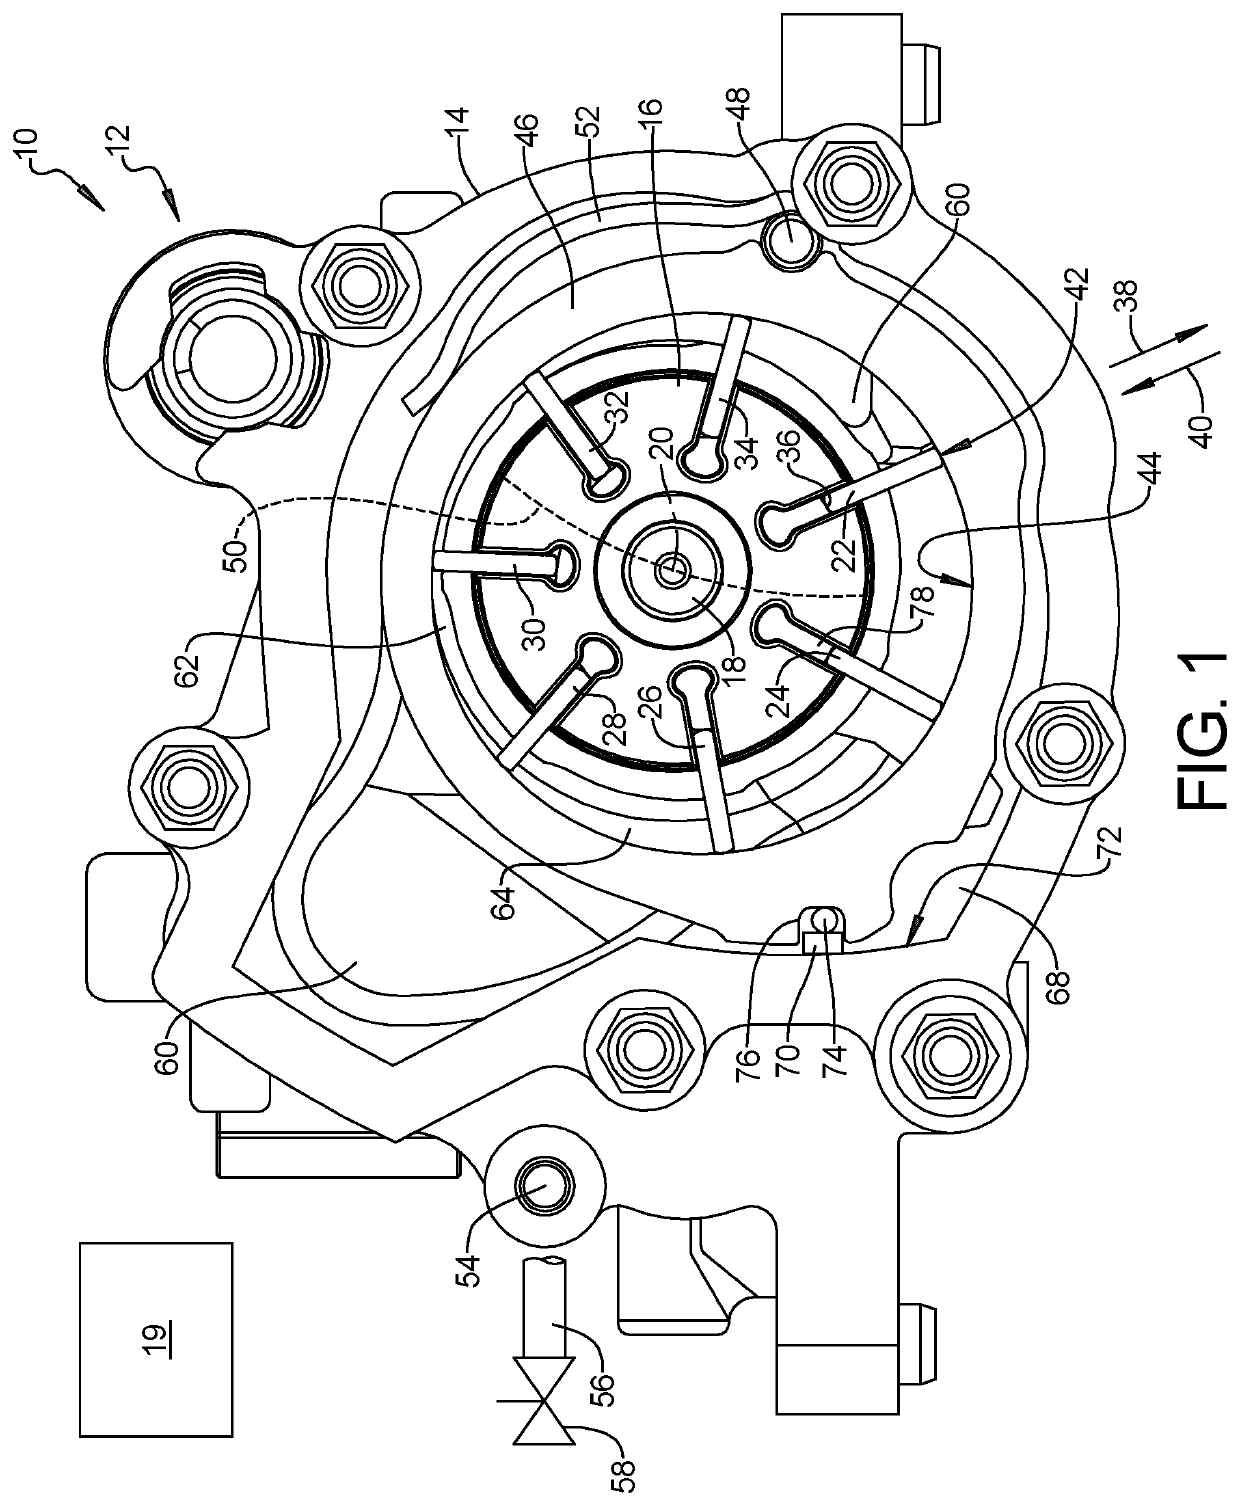 Variable displacement oil pump slide with bow spring